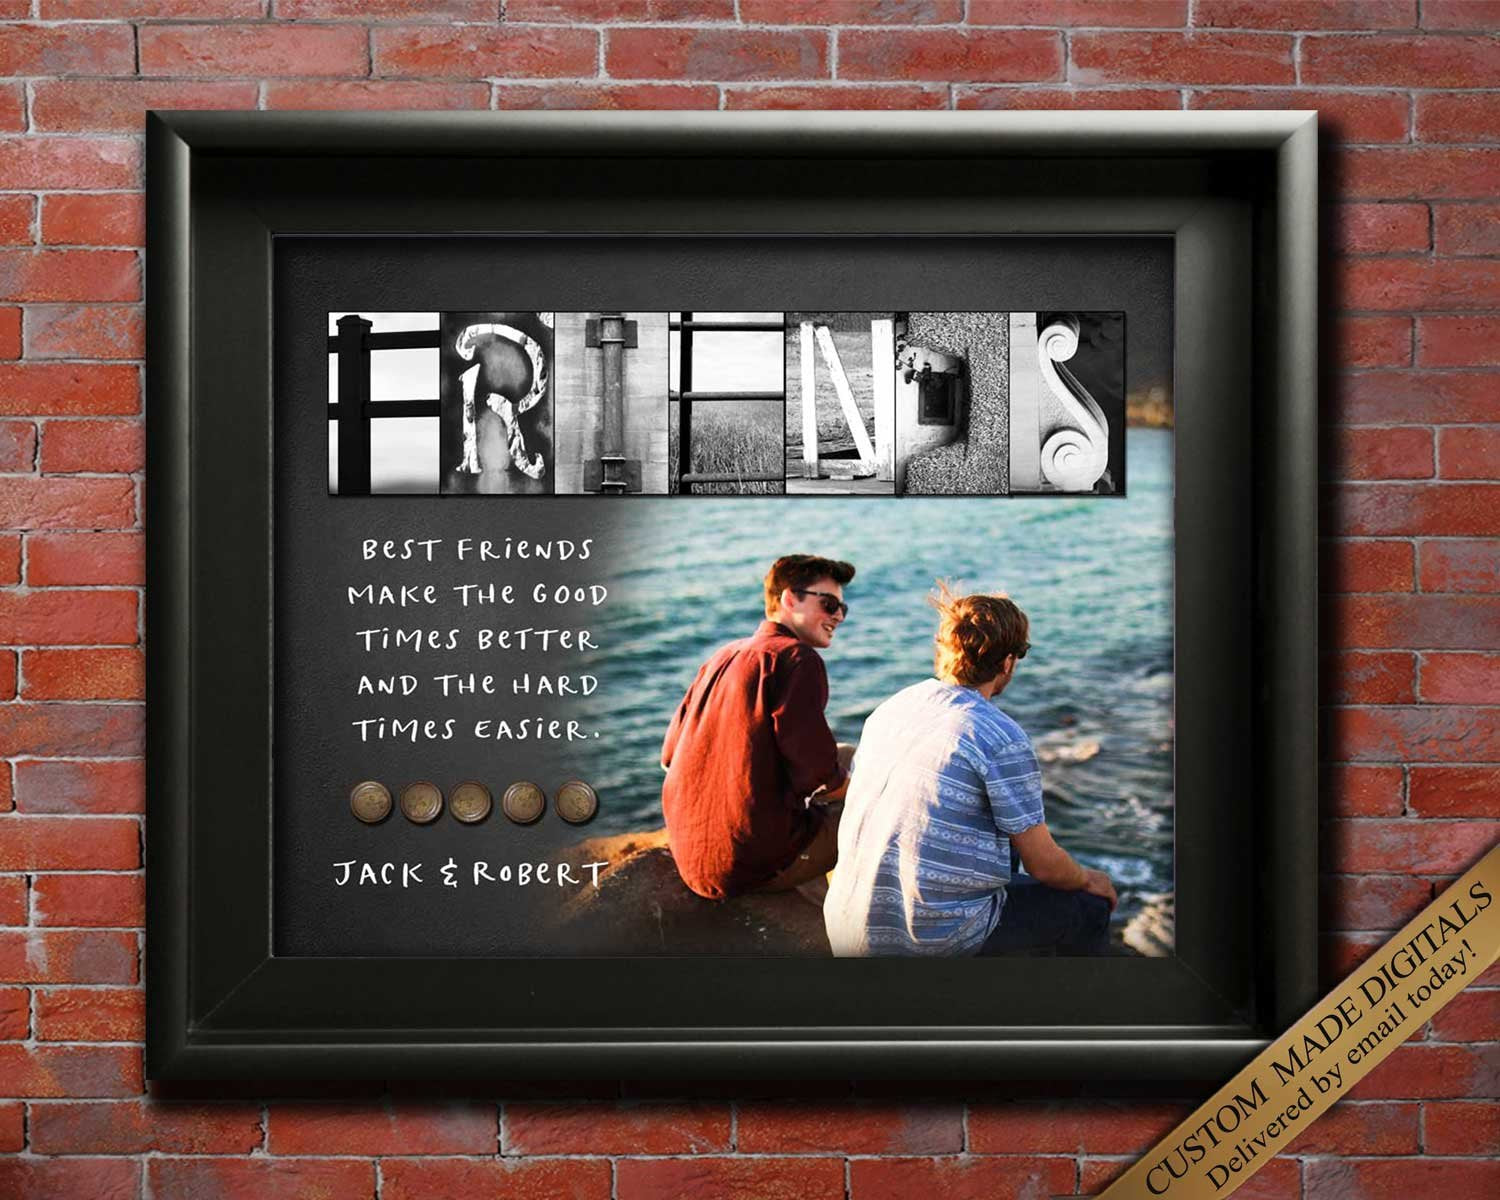 Friendship Day Gifts For The 10 Kinds of Friends We All Have! -  woodgeekstore